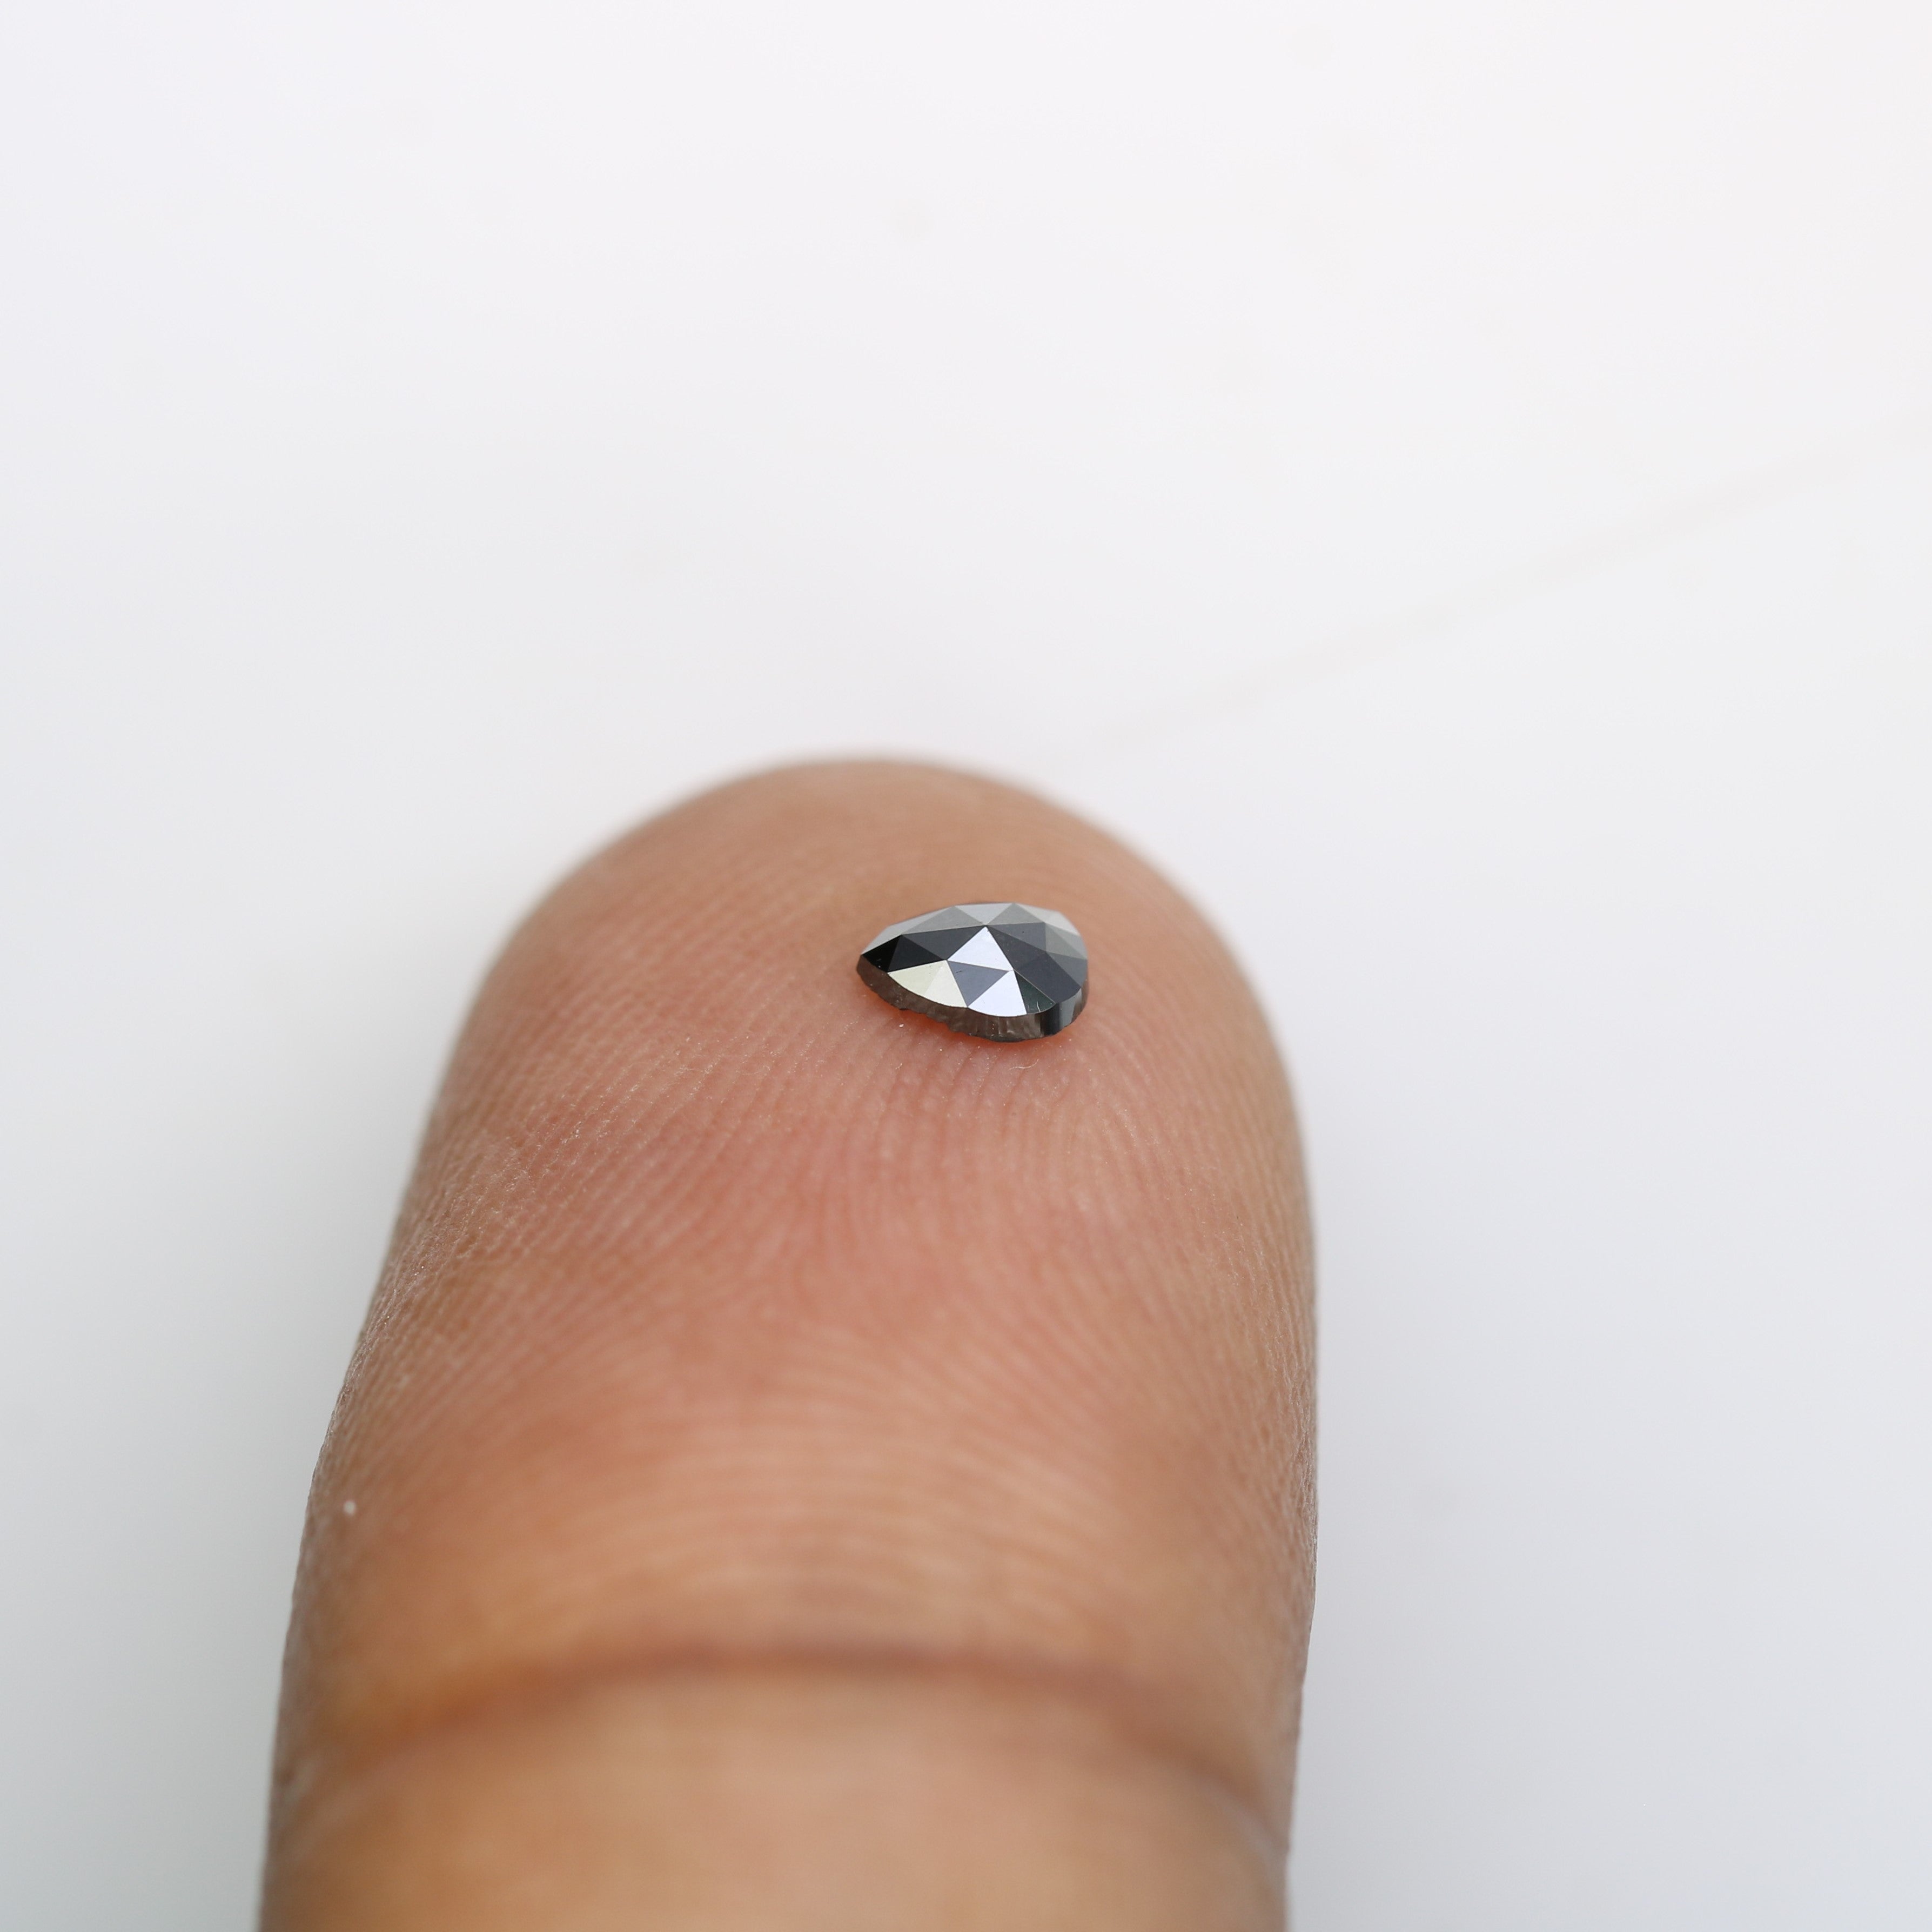 0.16 CT 4.10 MM Pear Cut Natural Black Loose Diamond For Engagement Ring